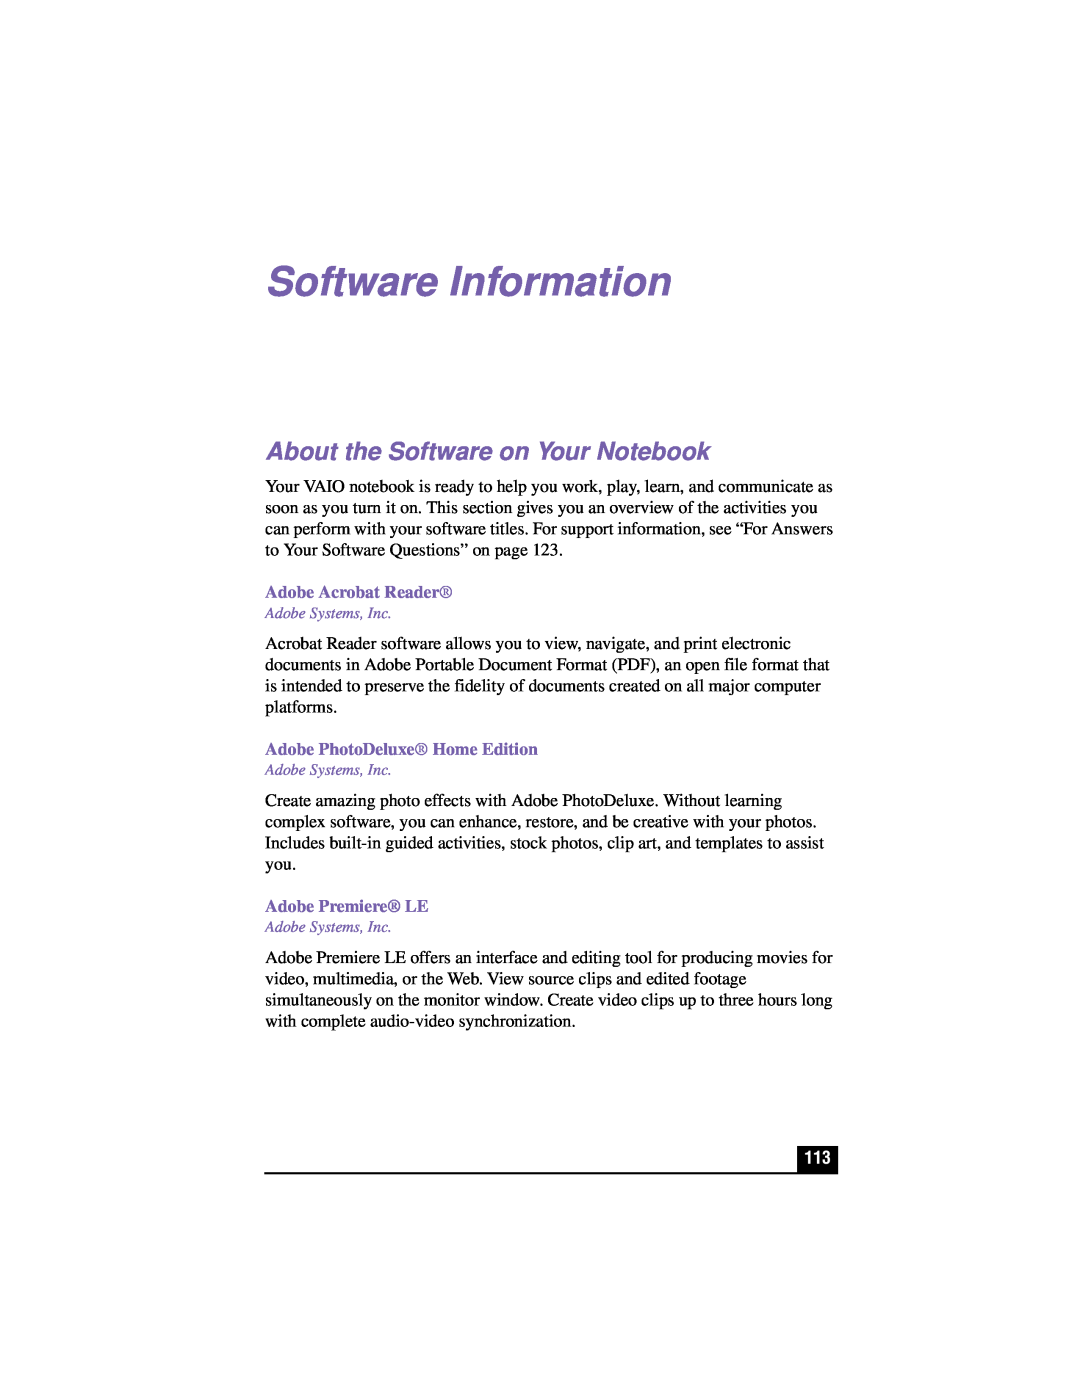 Sony PCG-XG500 manual Software Information, About the Software on Your Notebook, Adobe Acrobat Reader, Adobe Premiere LE 